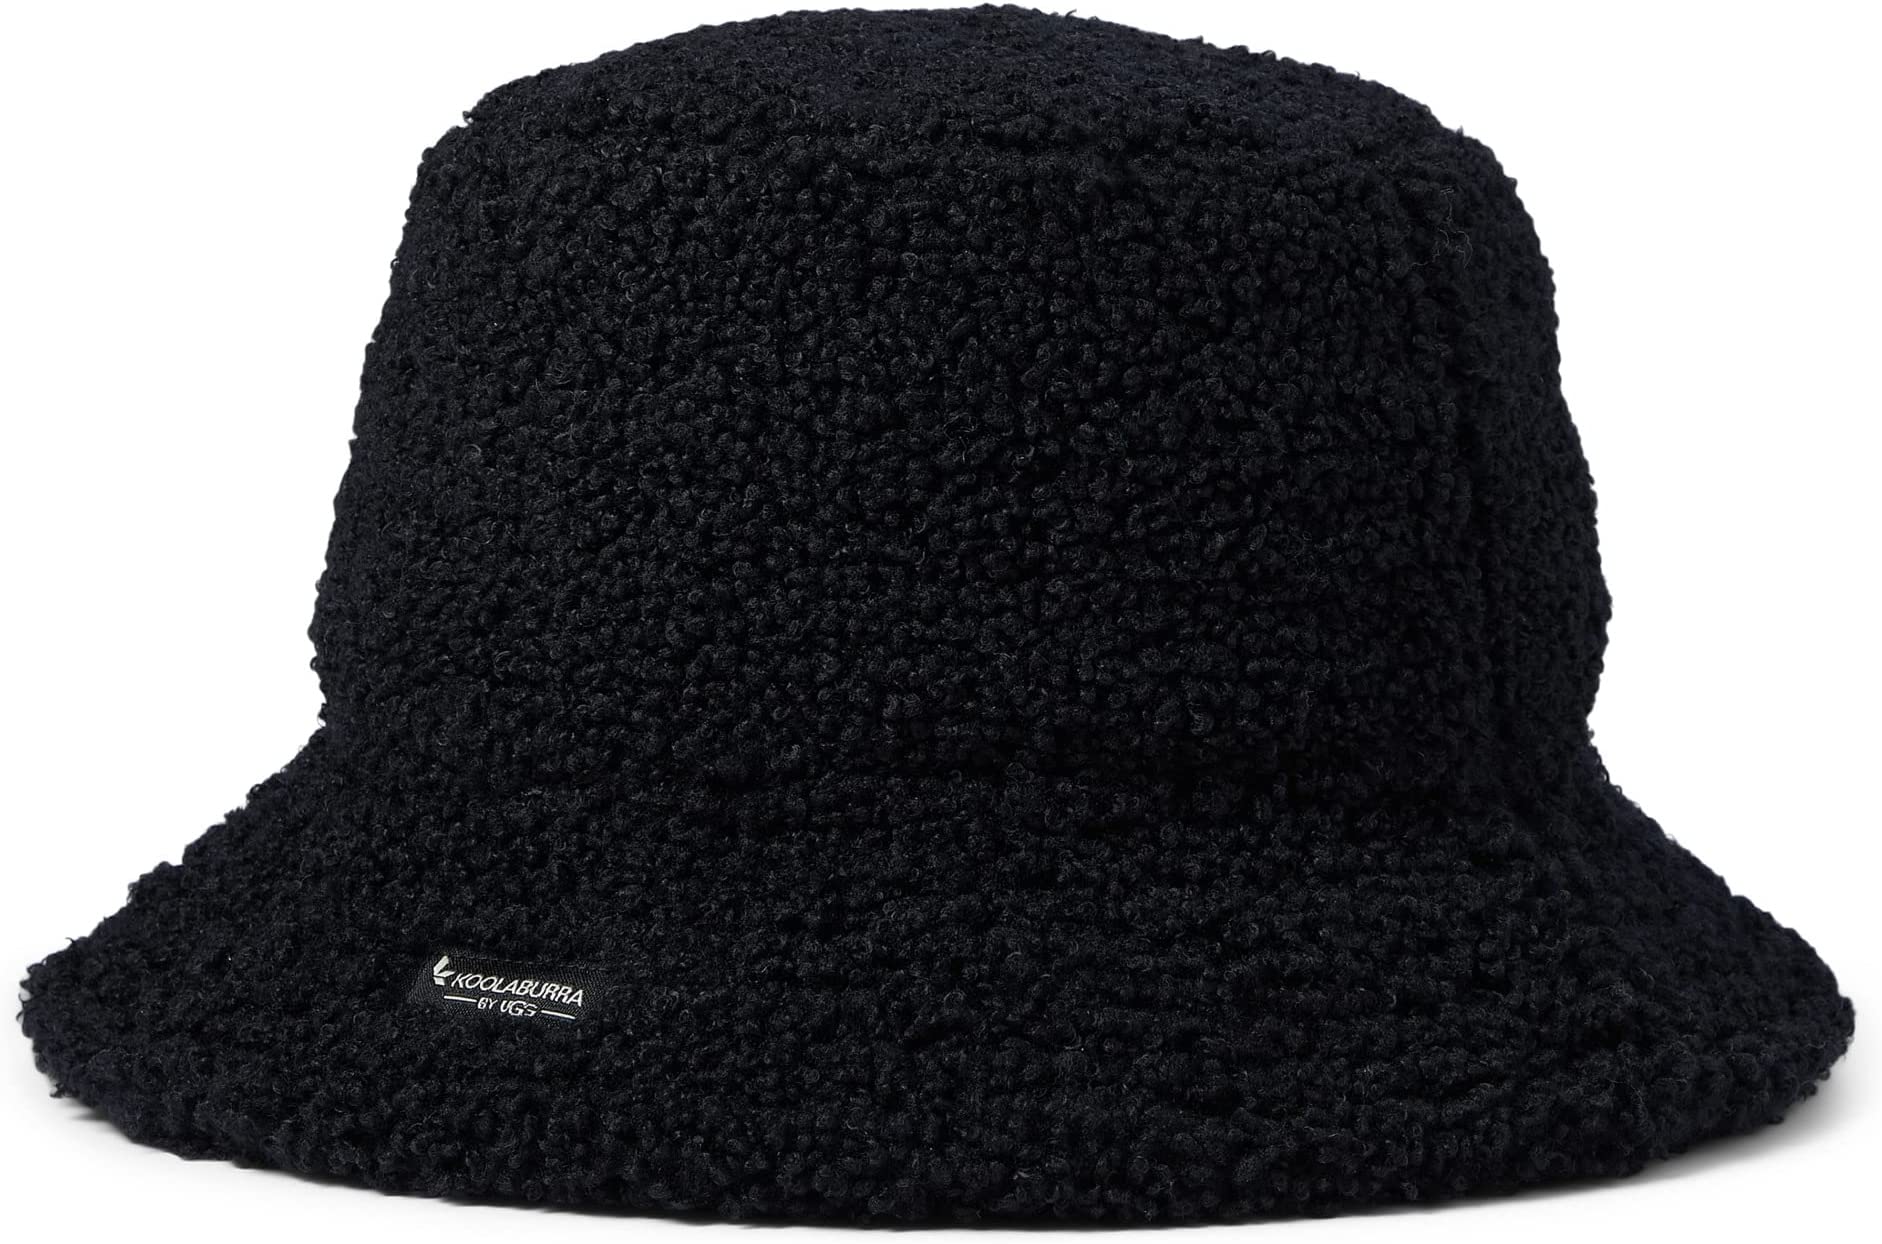 Koolaburra by UGG Sherpa Bucket Hat discount online | New collection